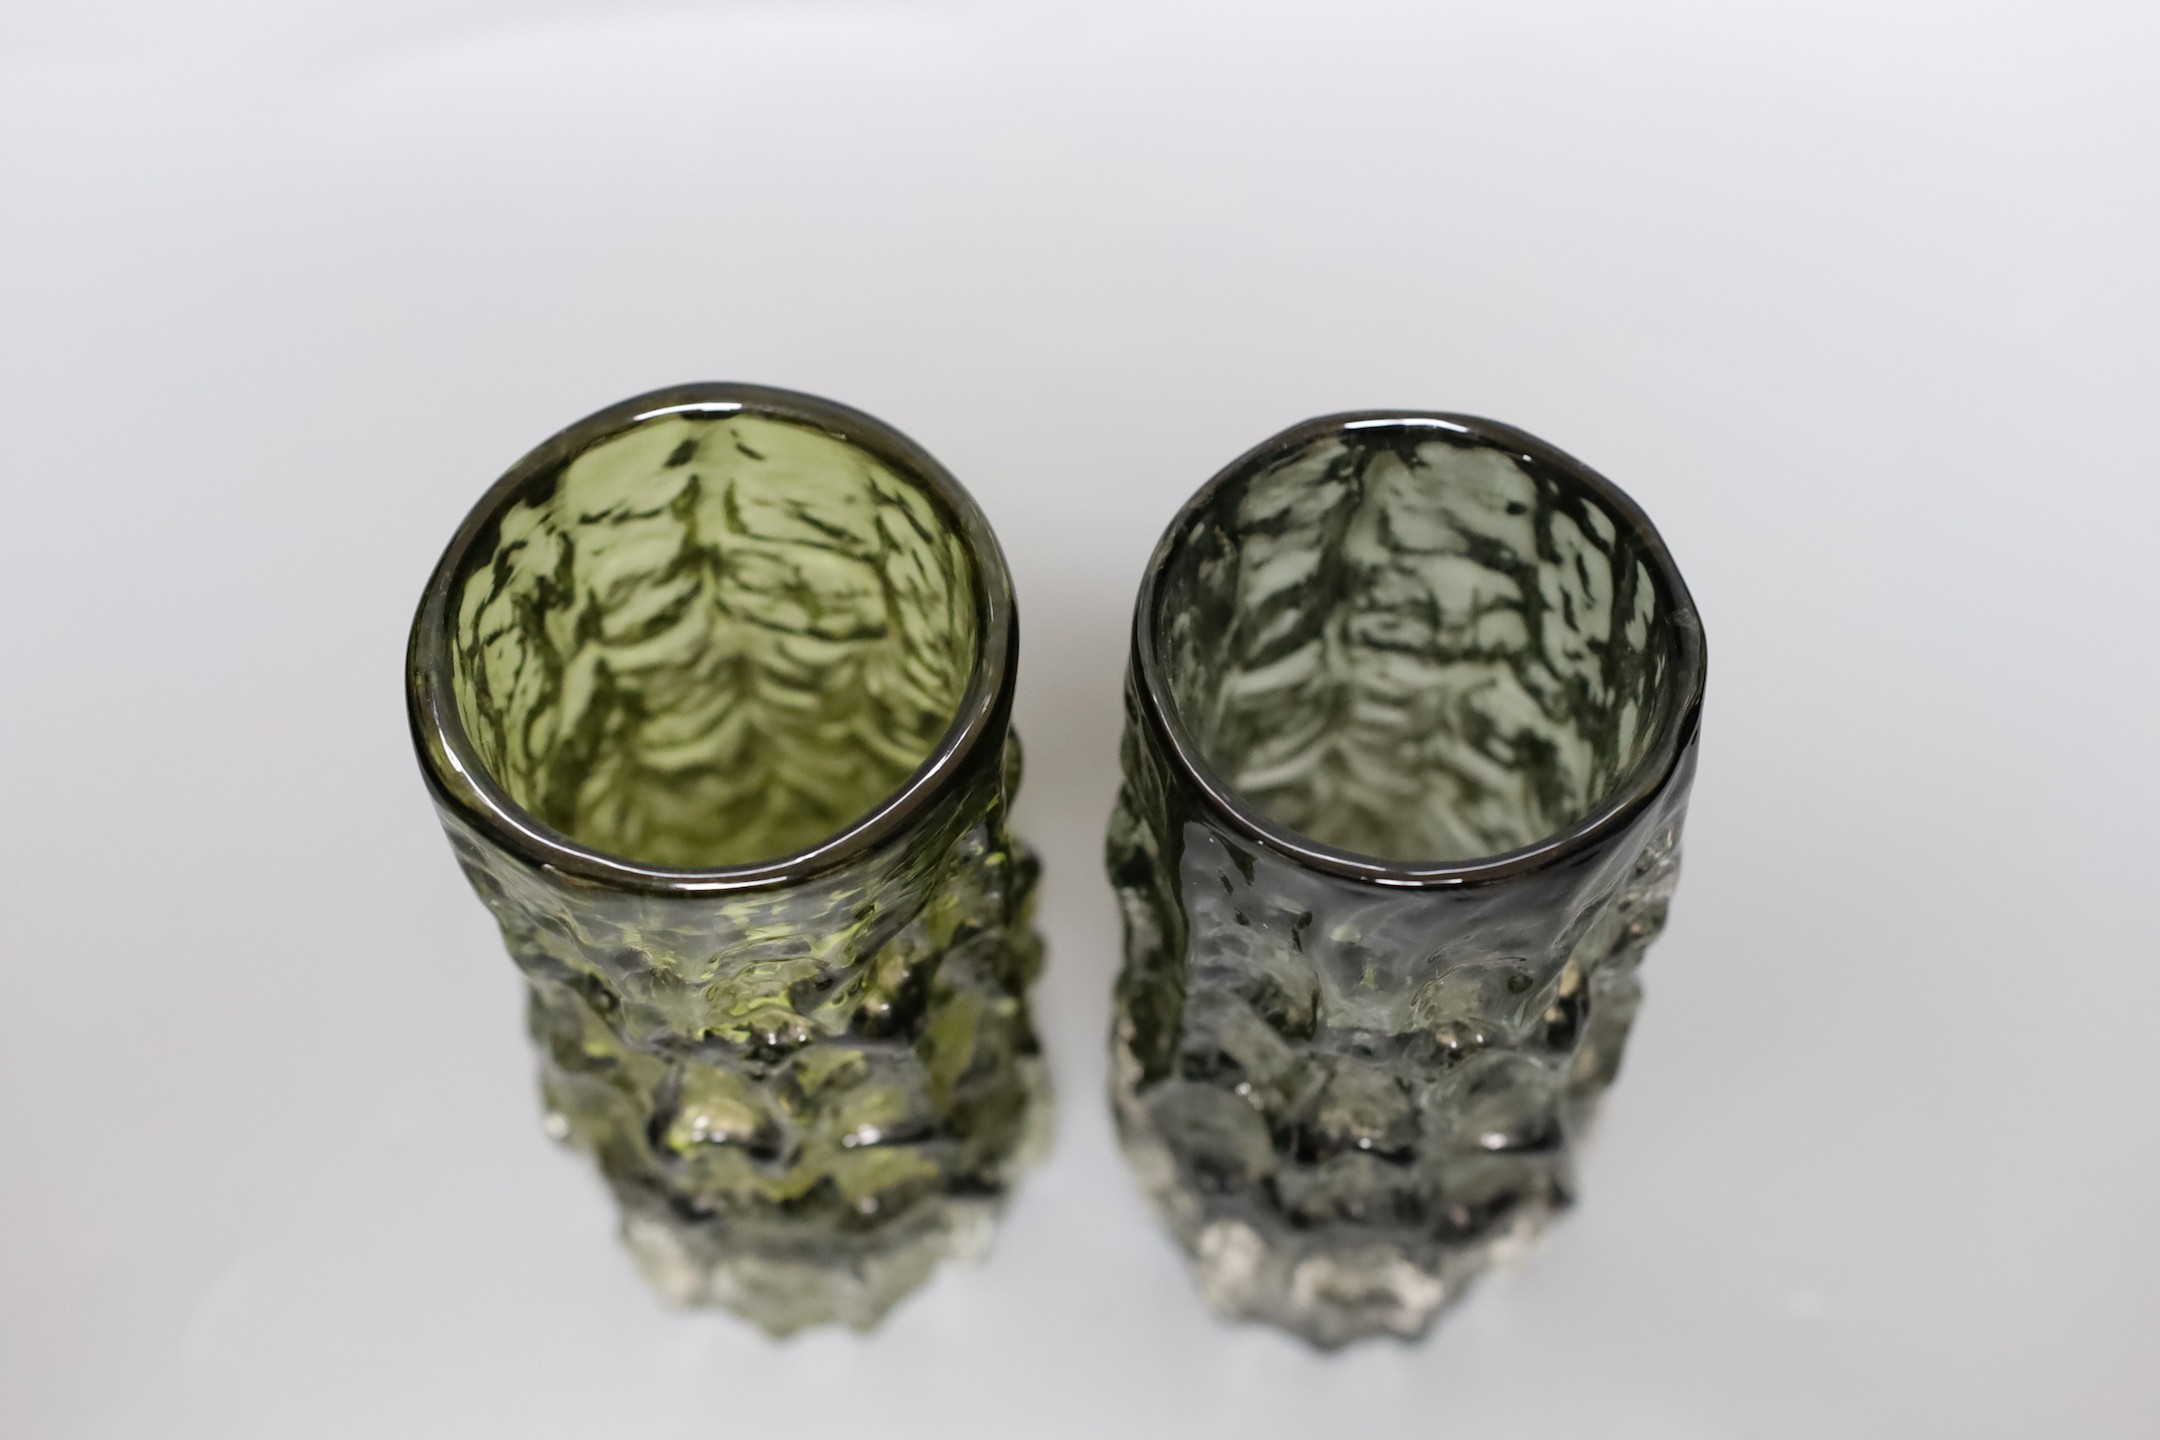 Two Whitefriars 'bark' cylinder vases, model 9689 designed by Geoffrey Baxter in ‘sage’ and 'willow' glass, each 15cm high.